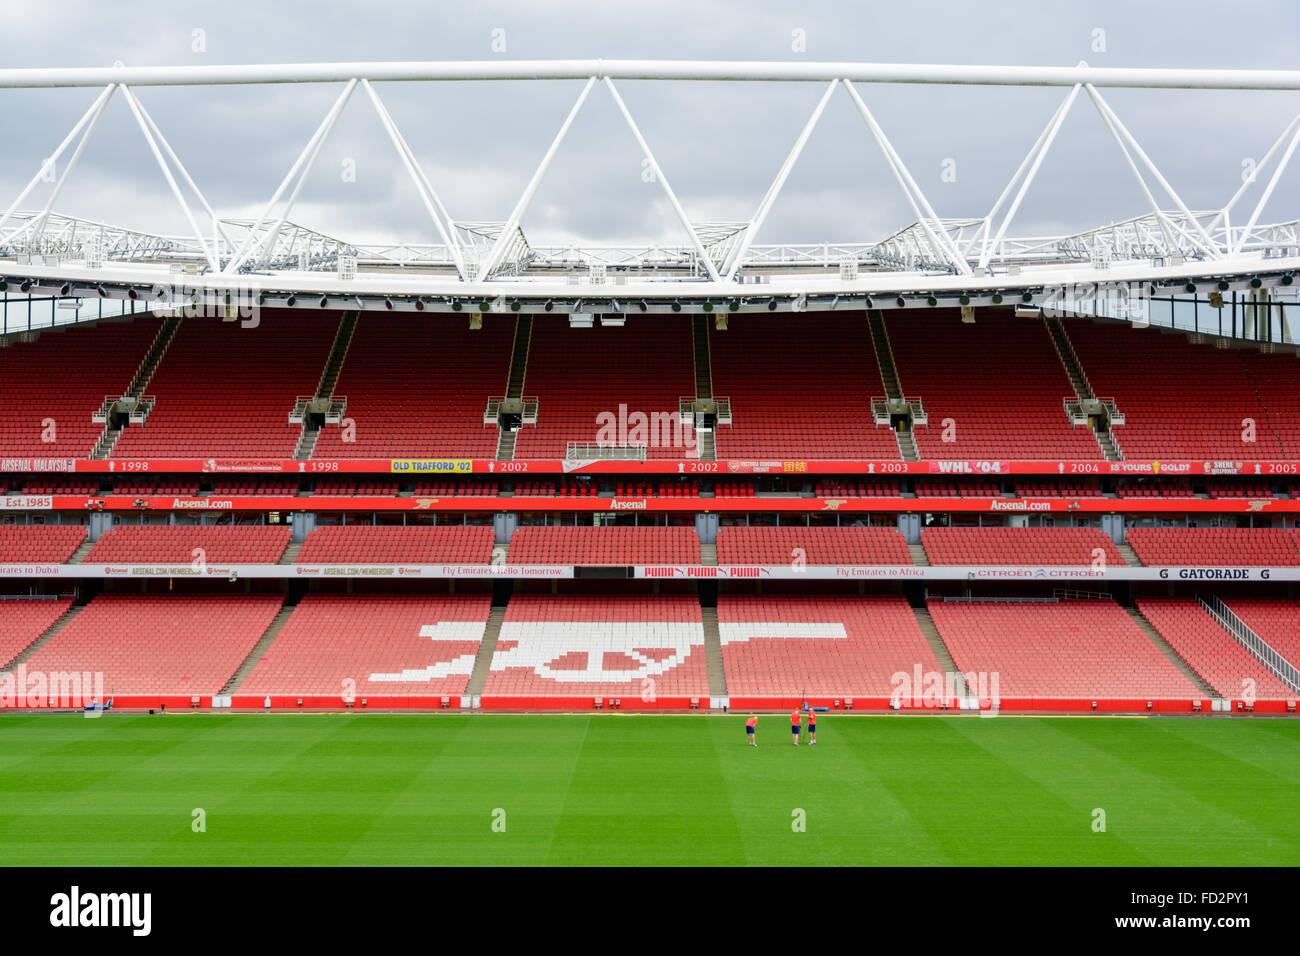 Seats and field inside the Emirates Stadium, home of Arsenal, with the Gunners symbol Stock Photo